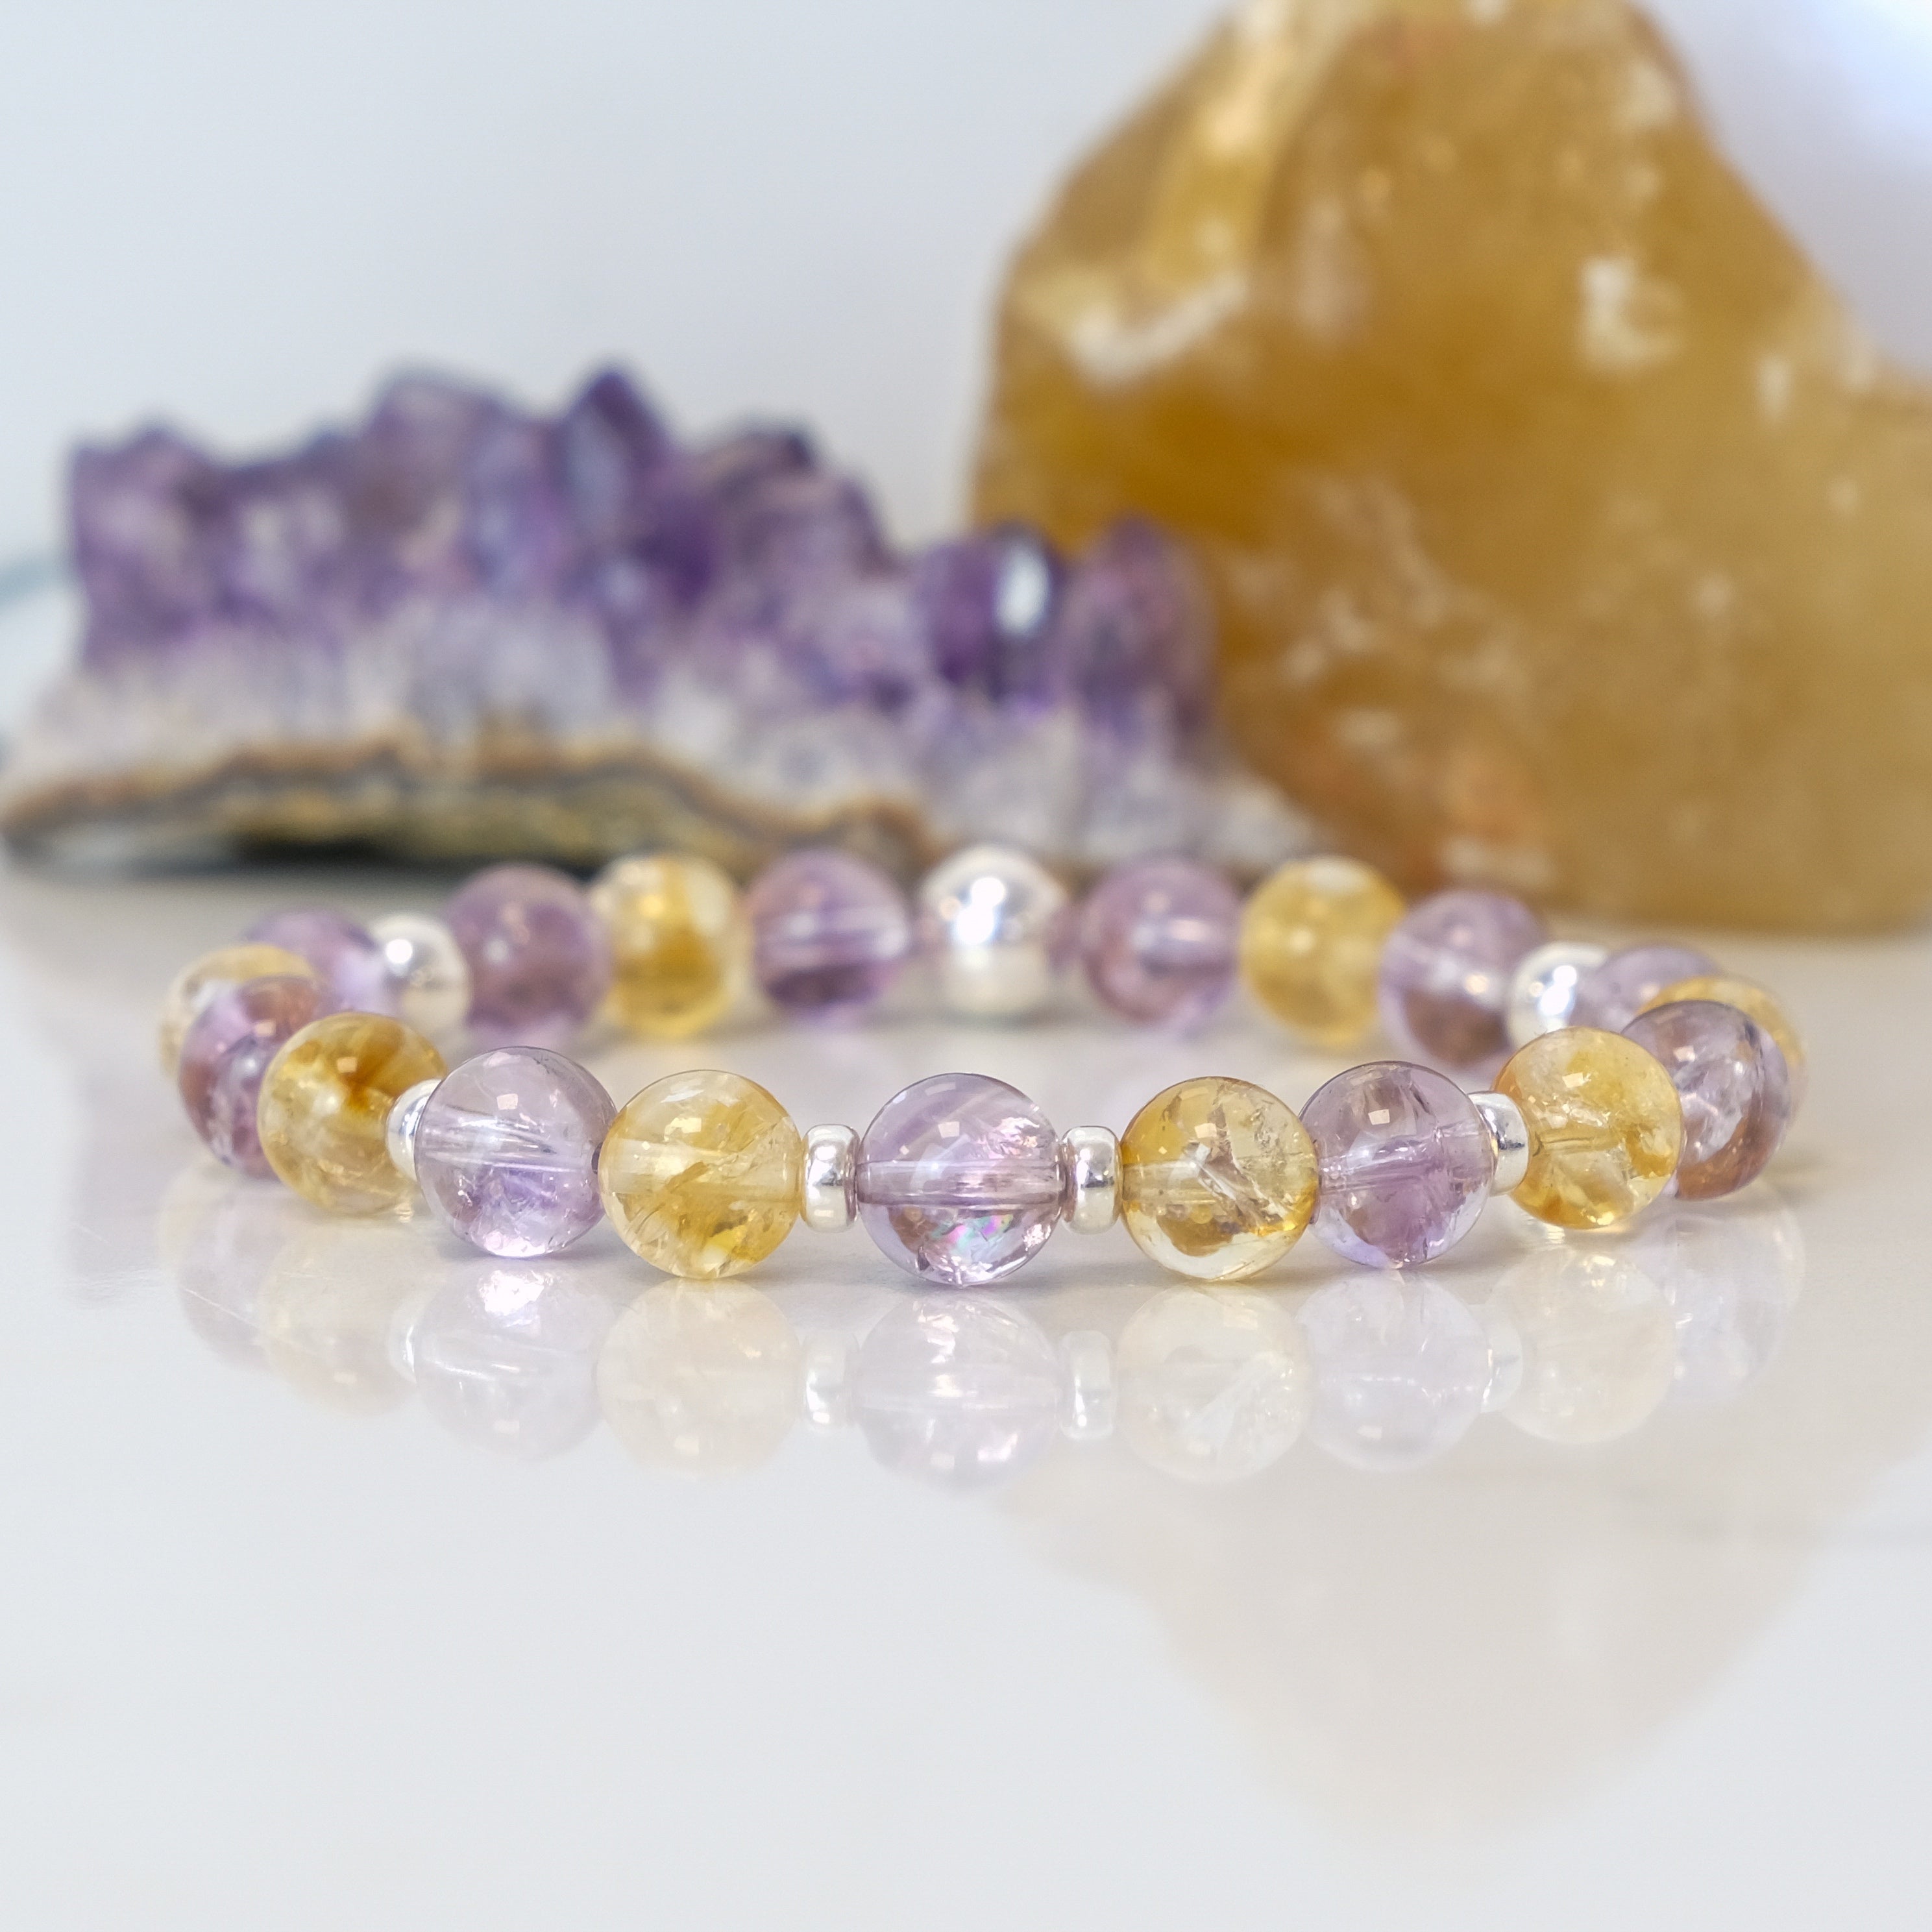 Amethyst and Citrine gemstone bracelet with 925 sterling silver accessories